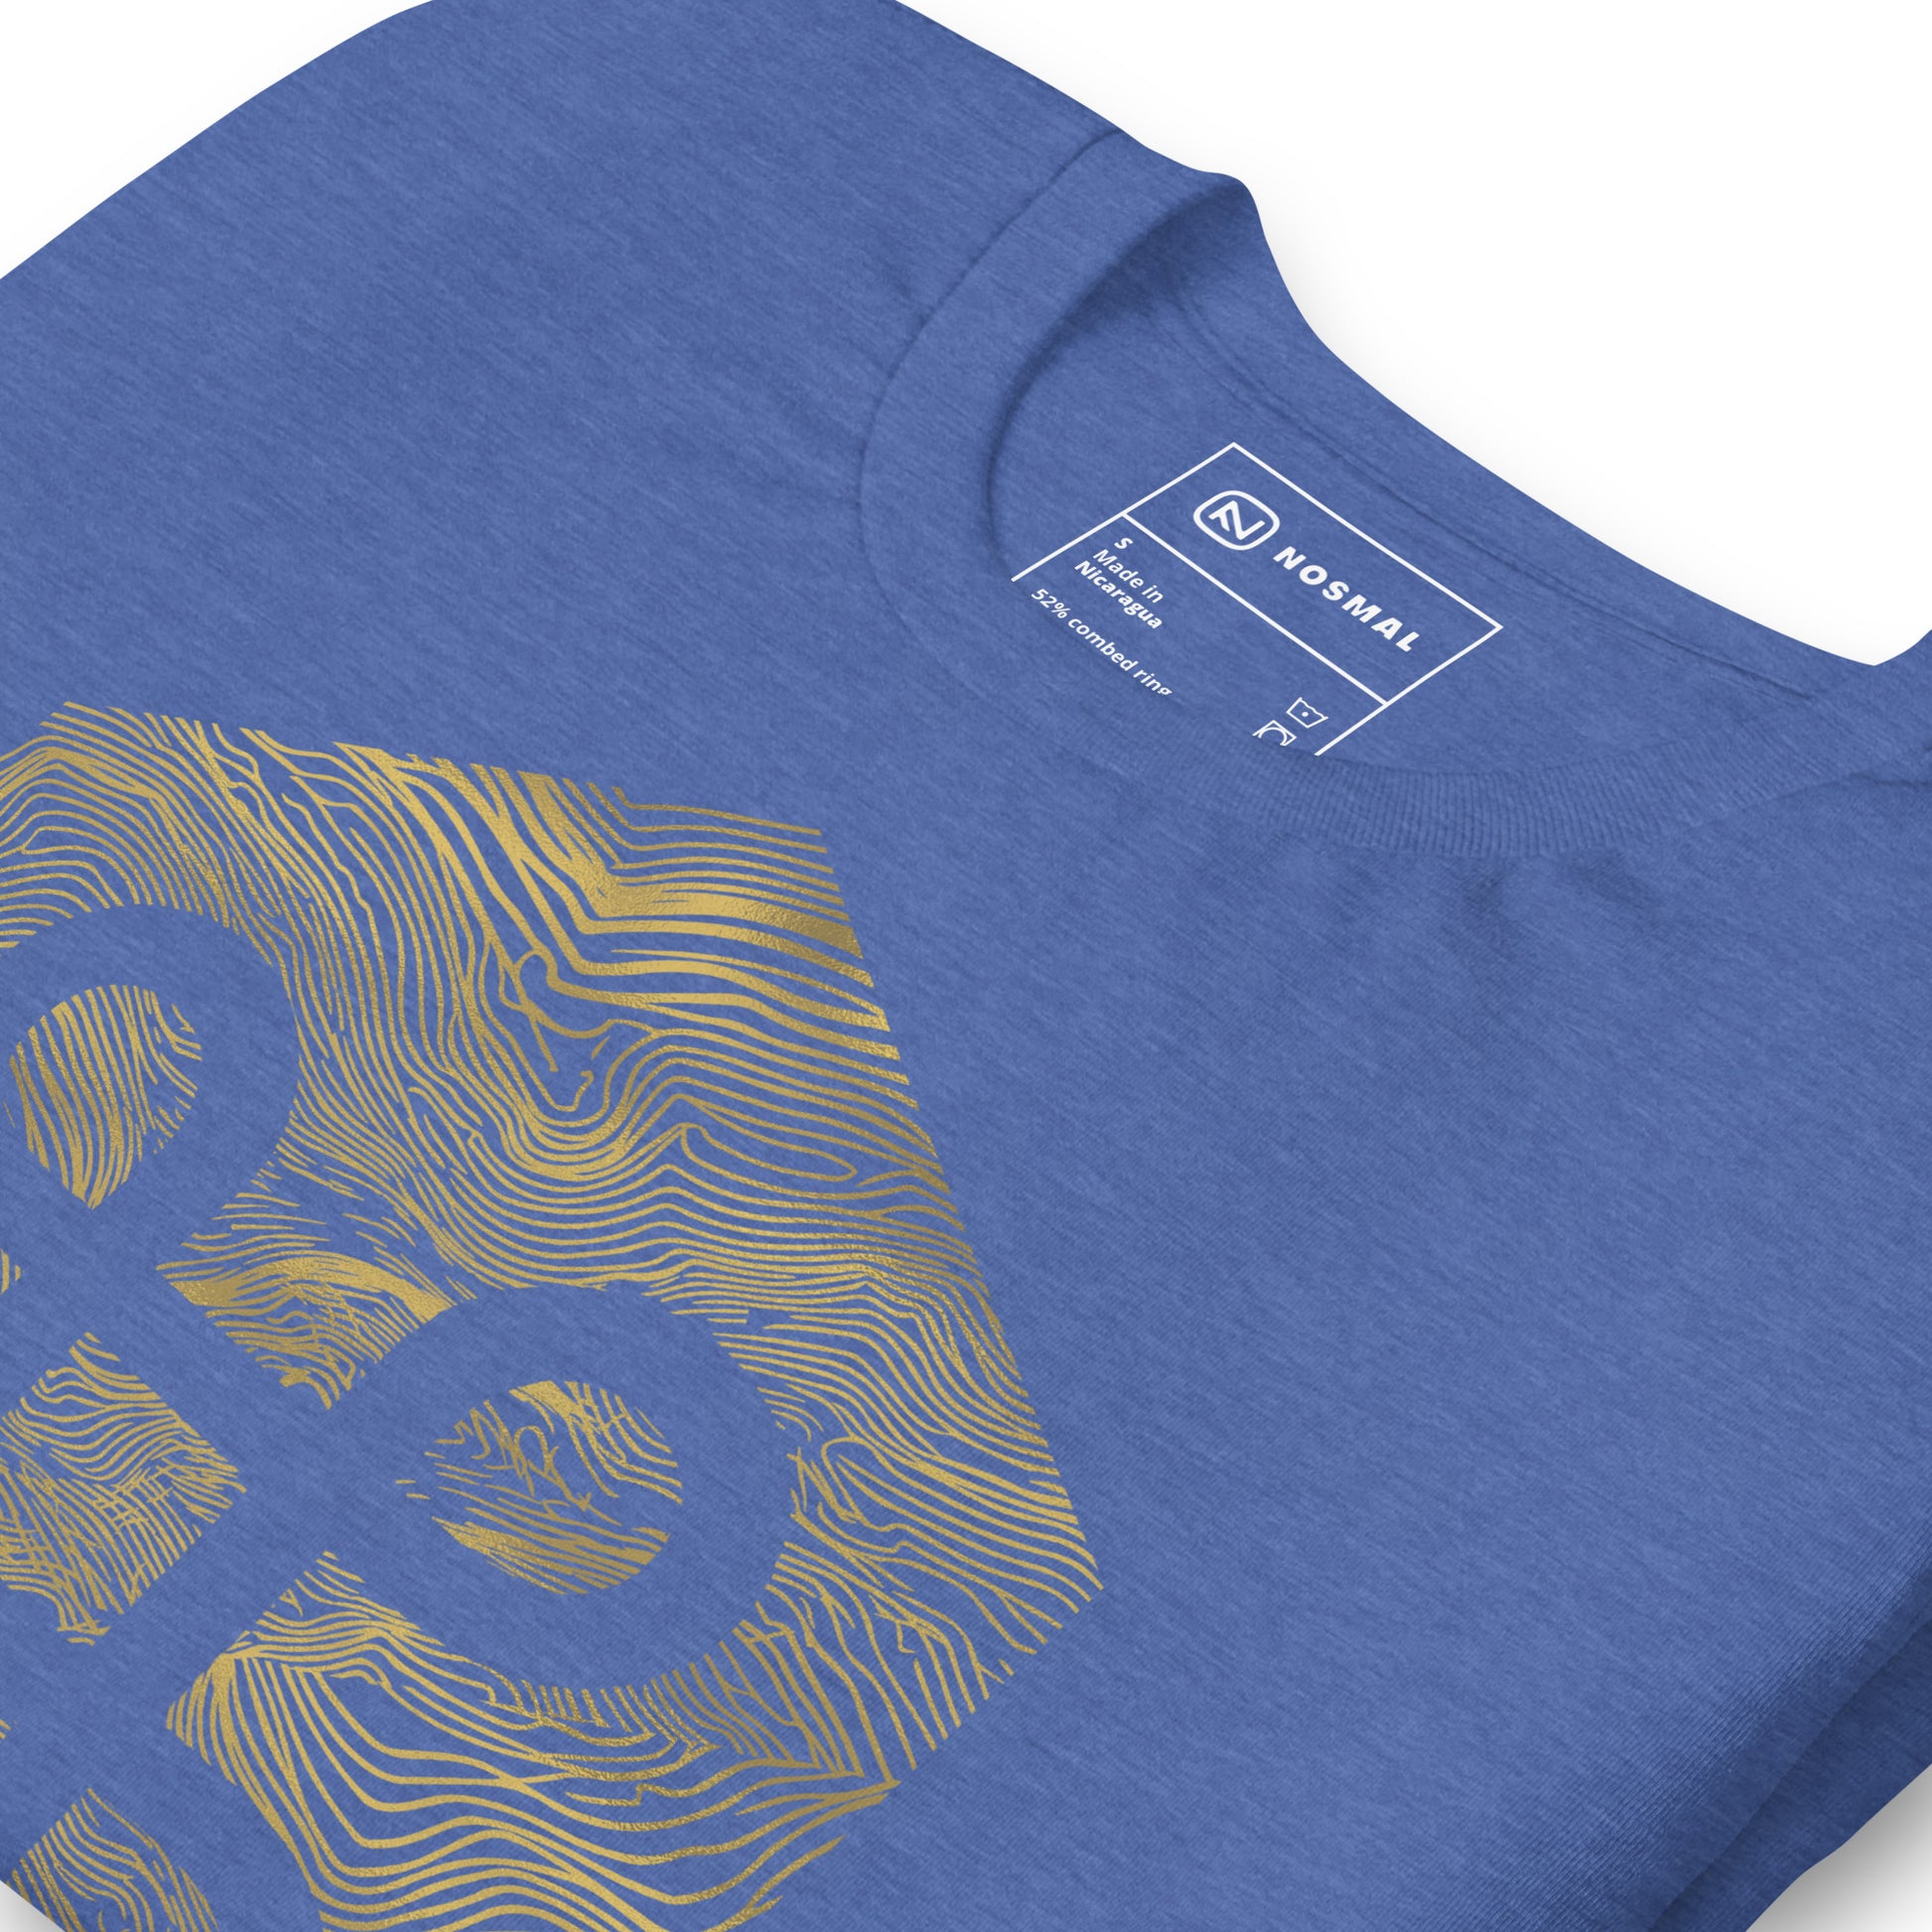 Angled close up shot of the commander gold design on heather true royal unisex t-shirt.